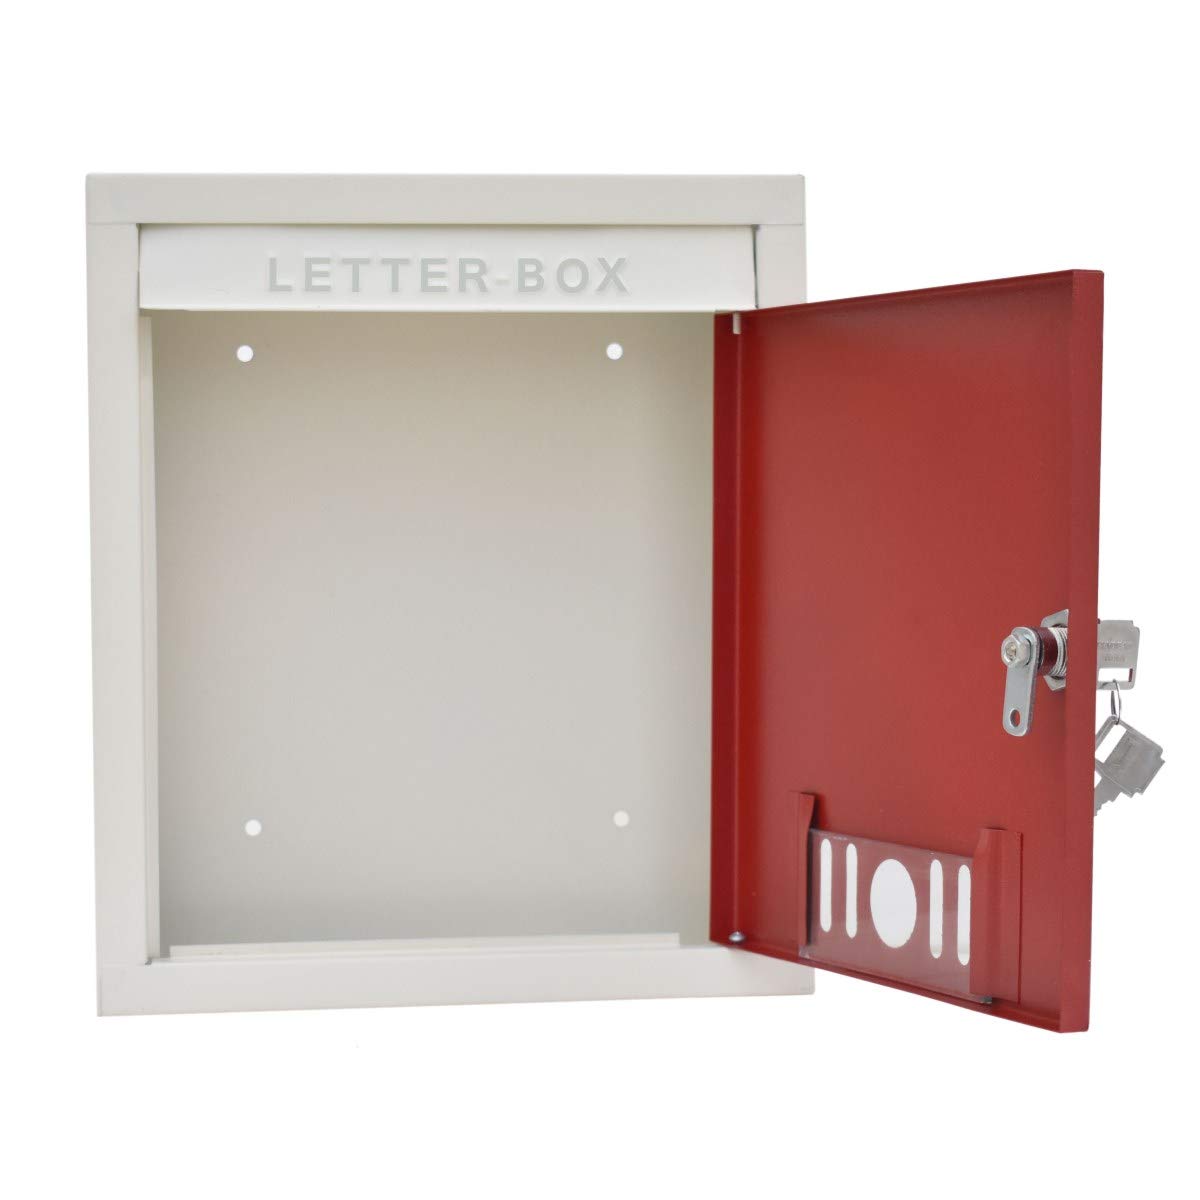 Plantex Big Size Letter Box for Home/Mail Box/Letter Box for gate and Wall with Key Lock (Red & Ivory)